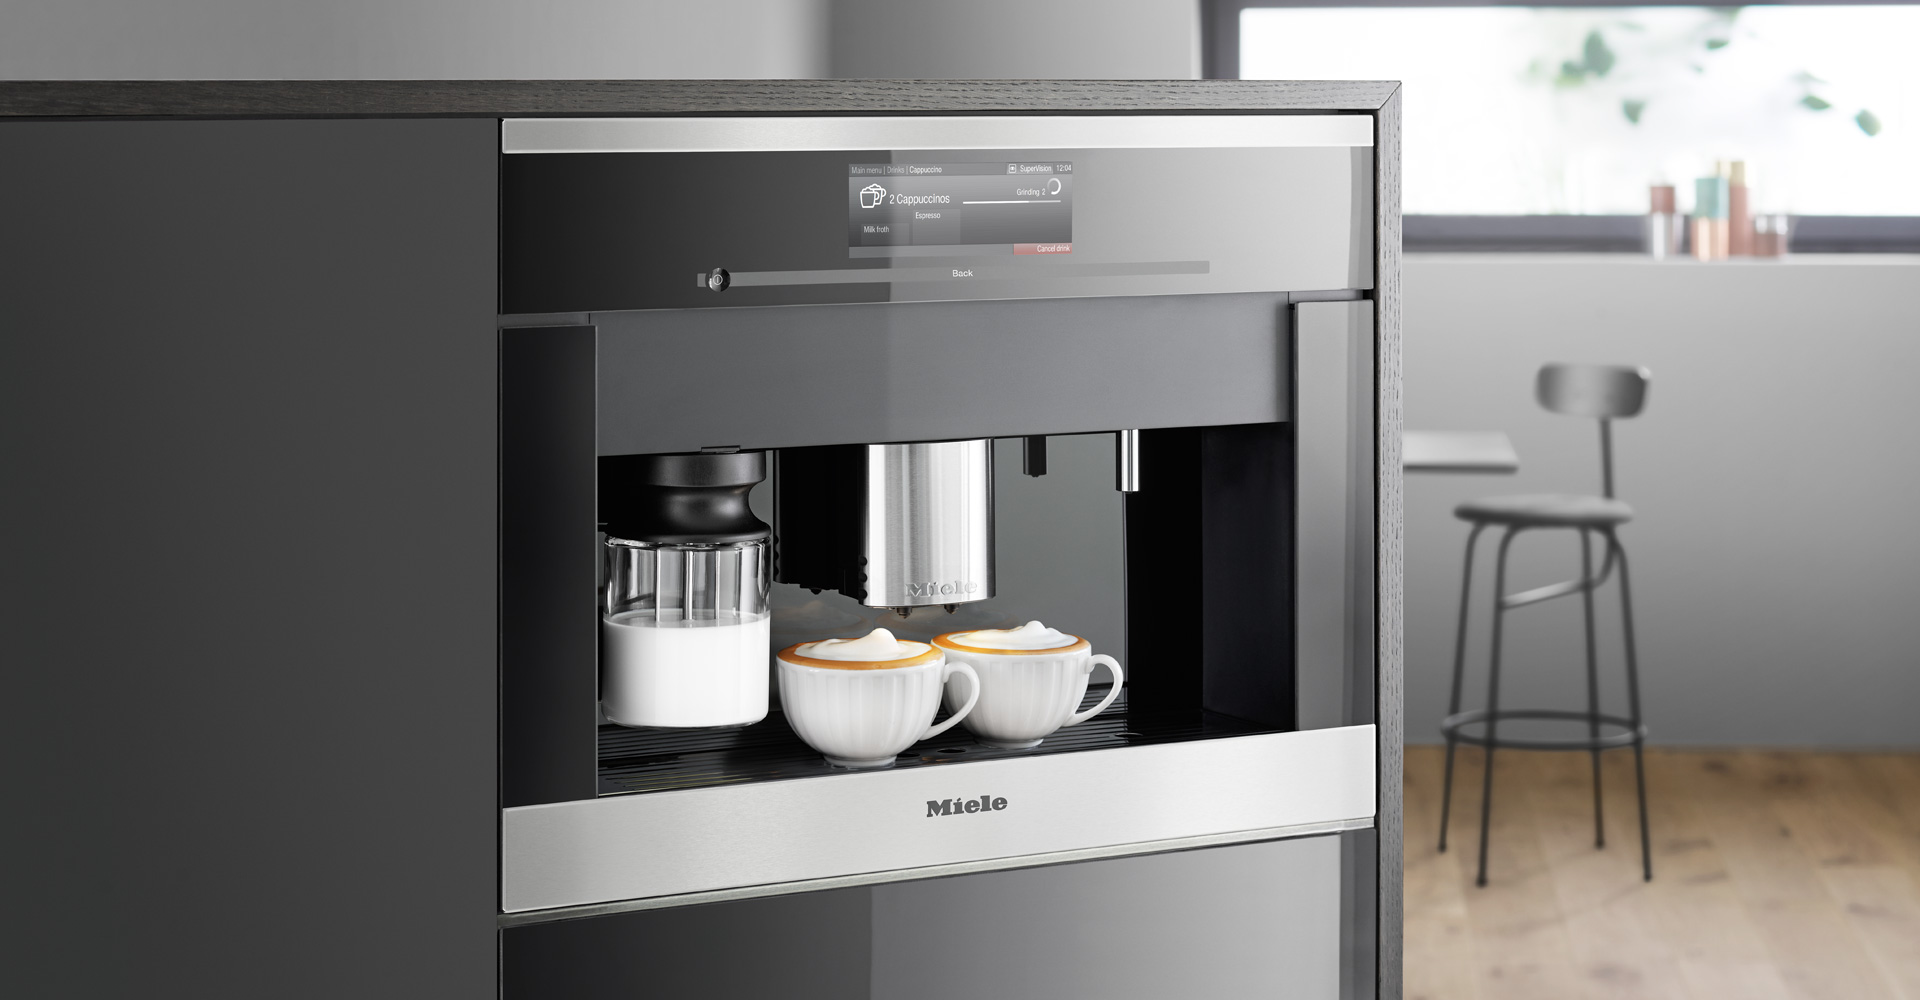 Built IN Coffee Machine From Miele Appliances